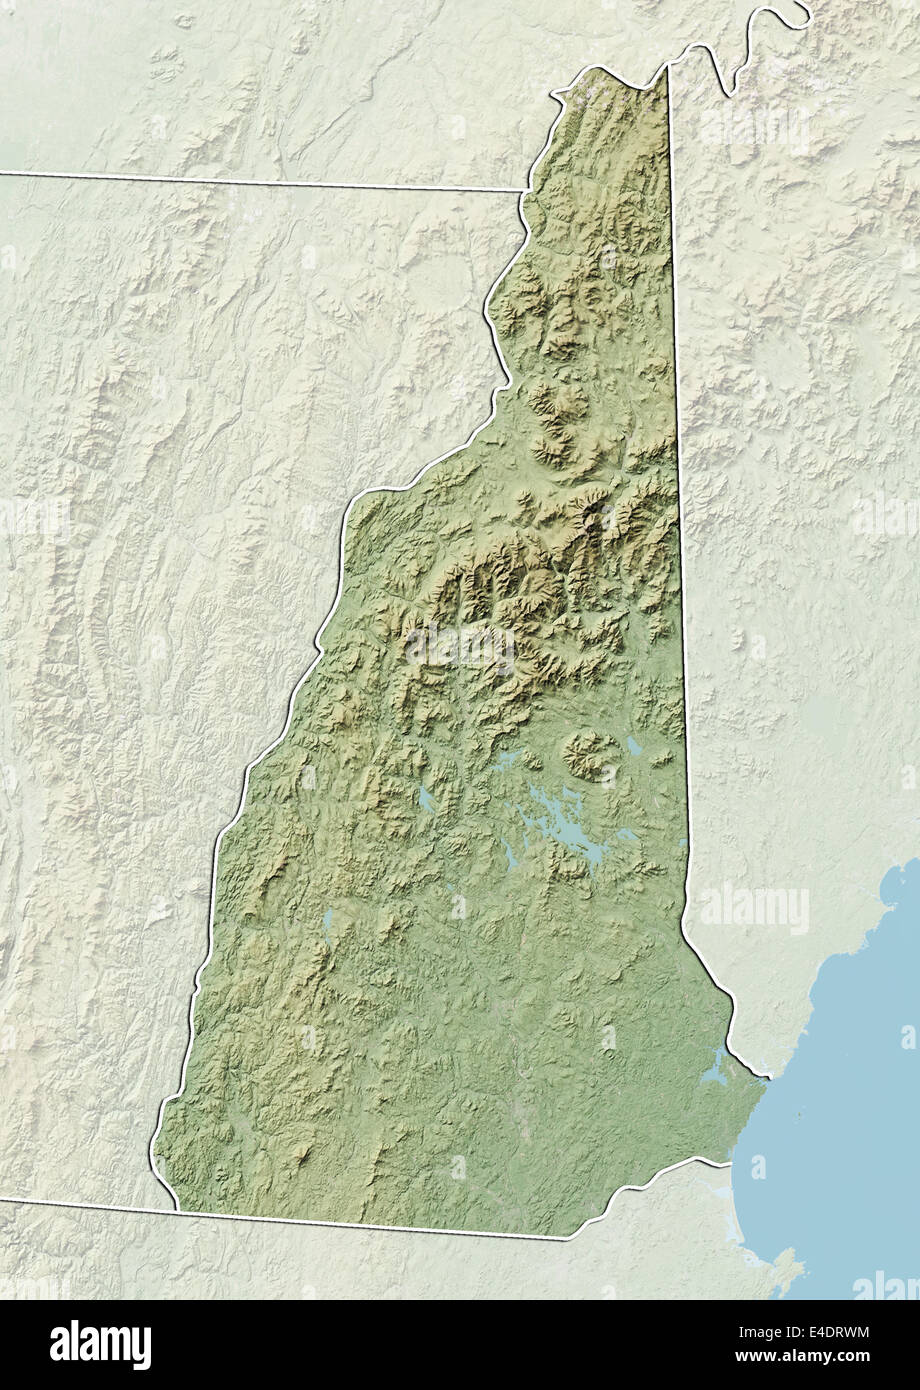 State of New Hampshire, United States, Relief Map Stock Photo